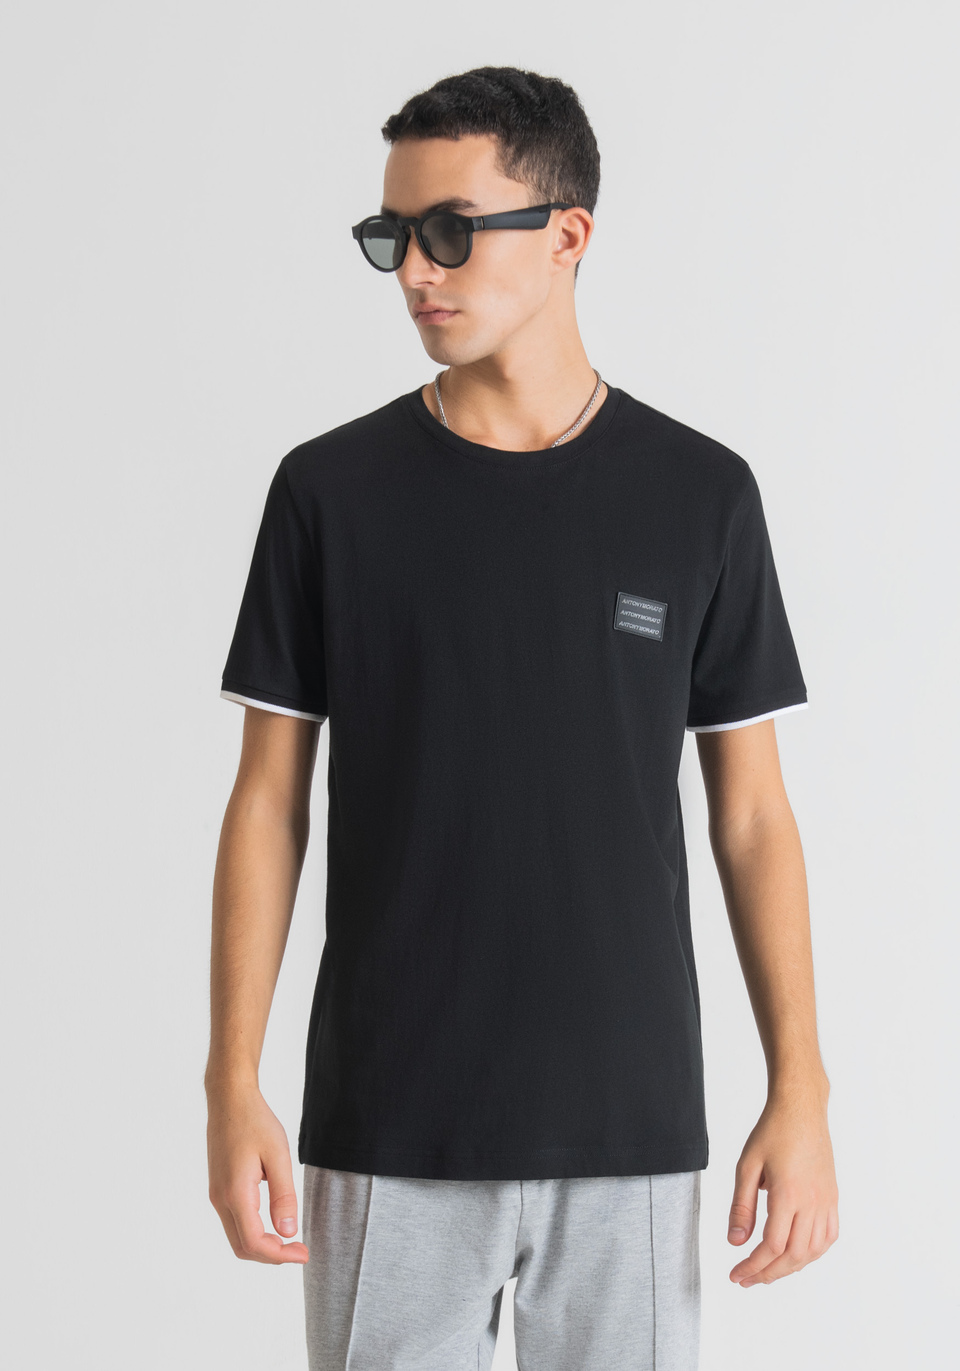 SLIM FIT T-SHIRT IN PURE COTTON WITH LOGO PATCH - Antony Morato Online Shop